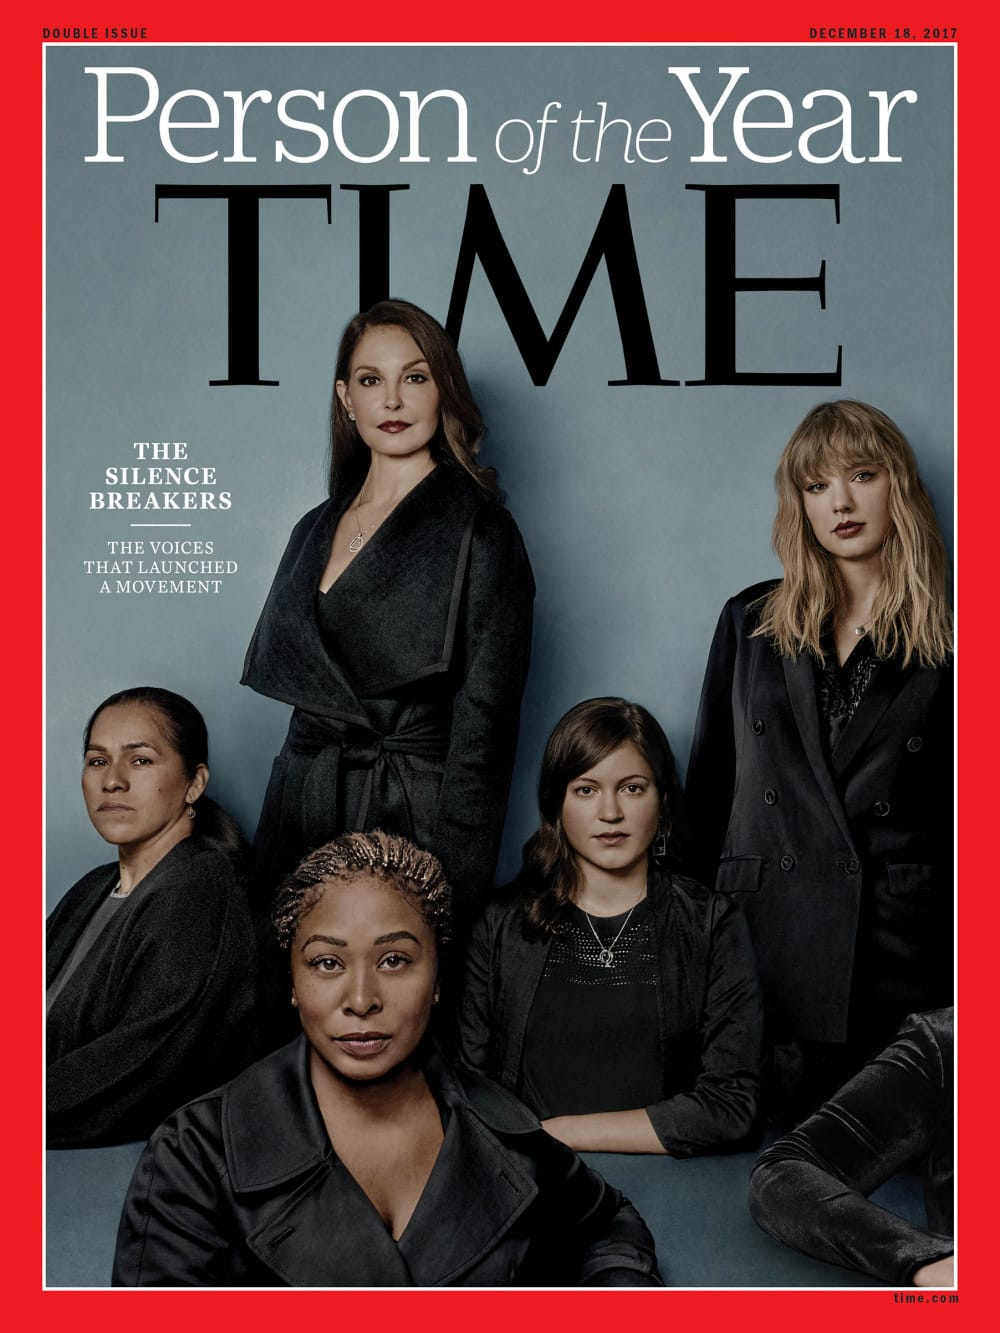 "Time" Person of the Year 2017